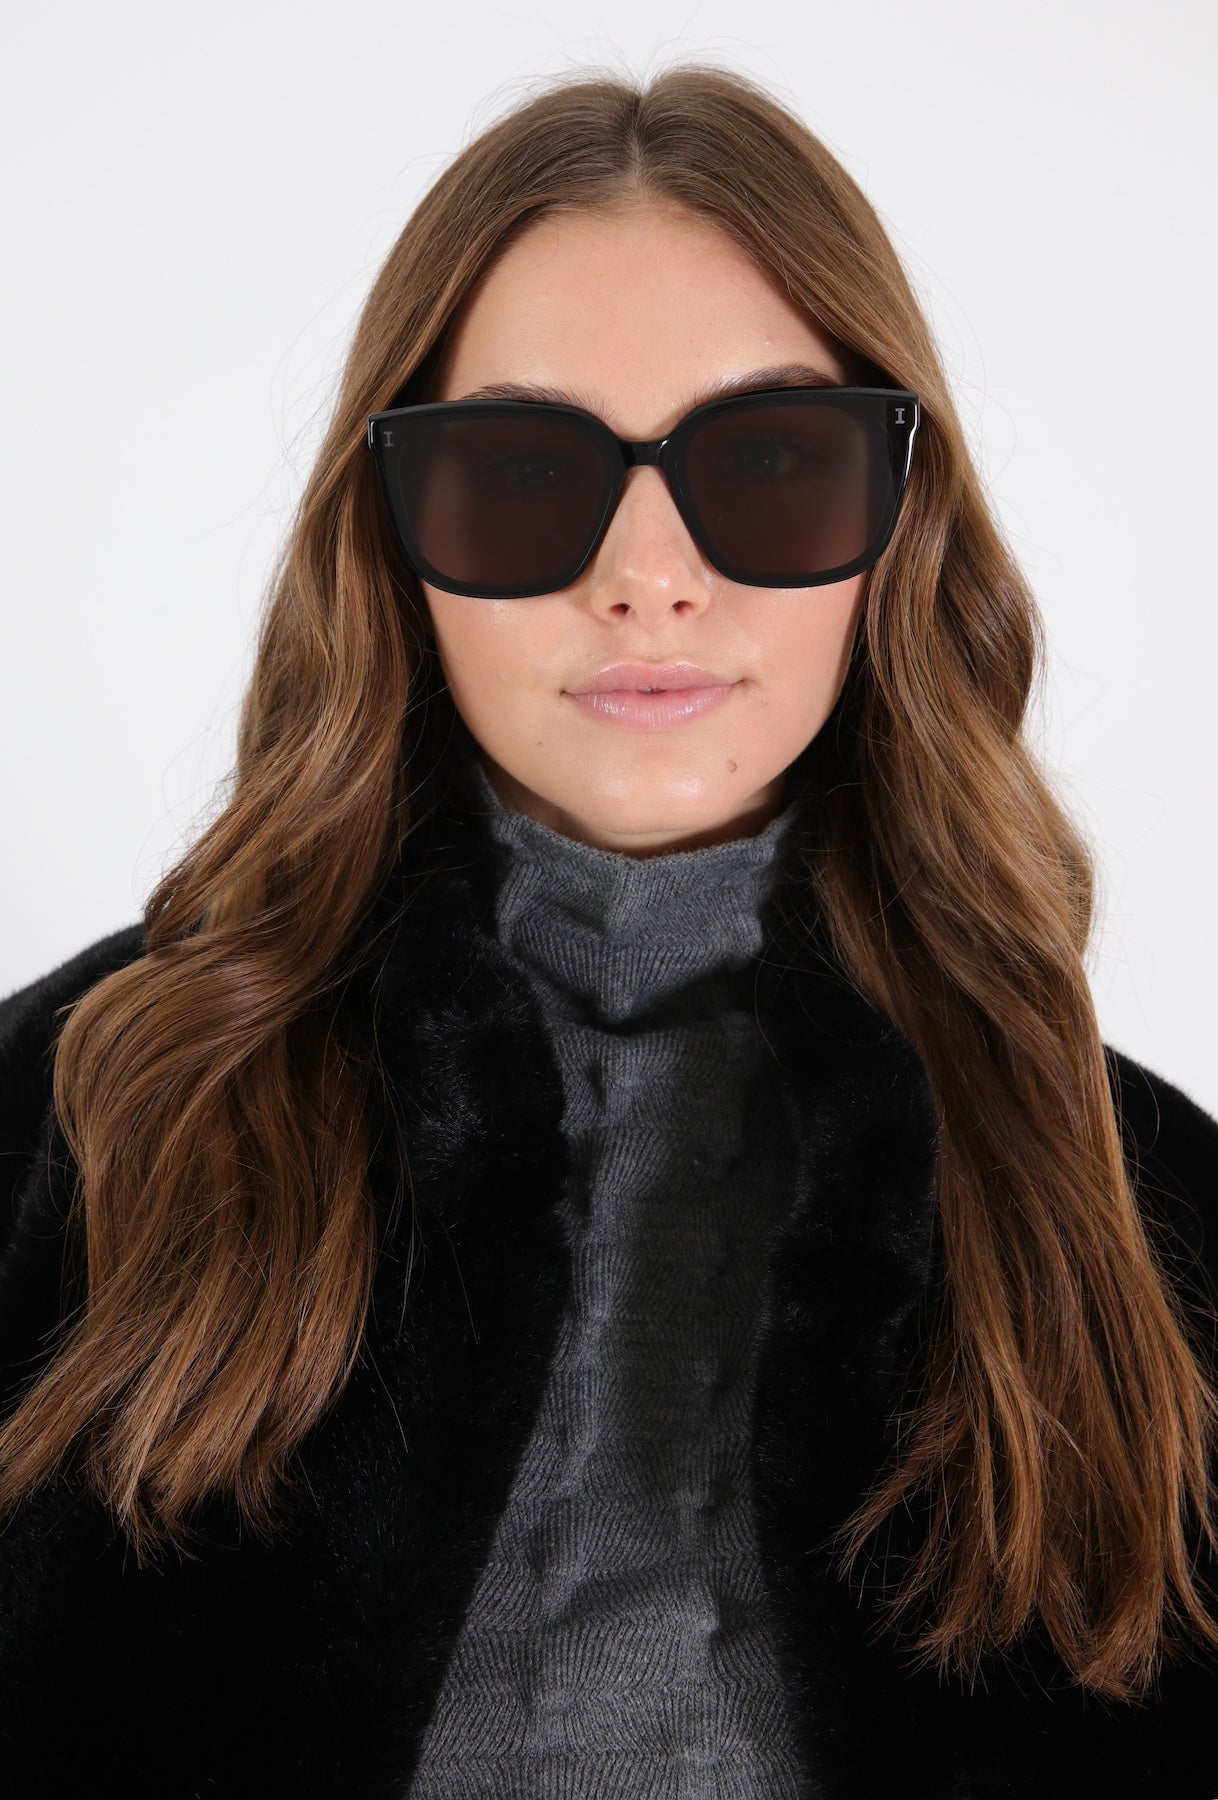 Brunette model in Mallorca Sunglasses in Black paired with a grey turtleneck and black jacket.